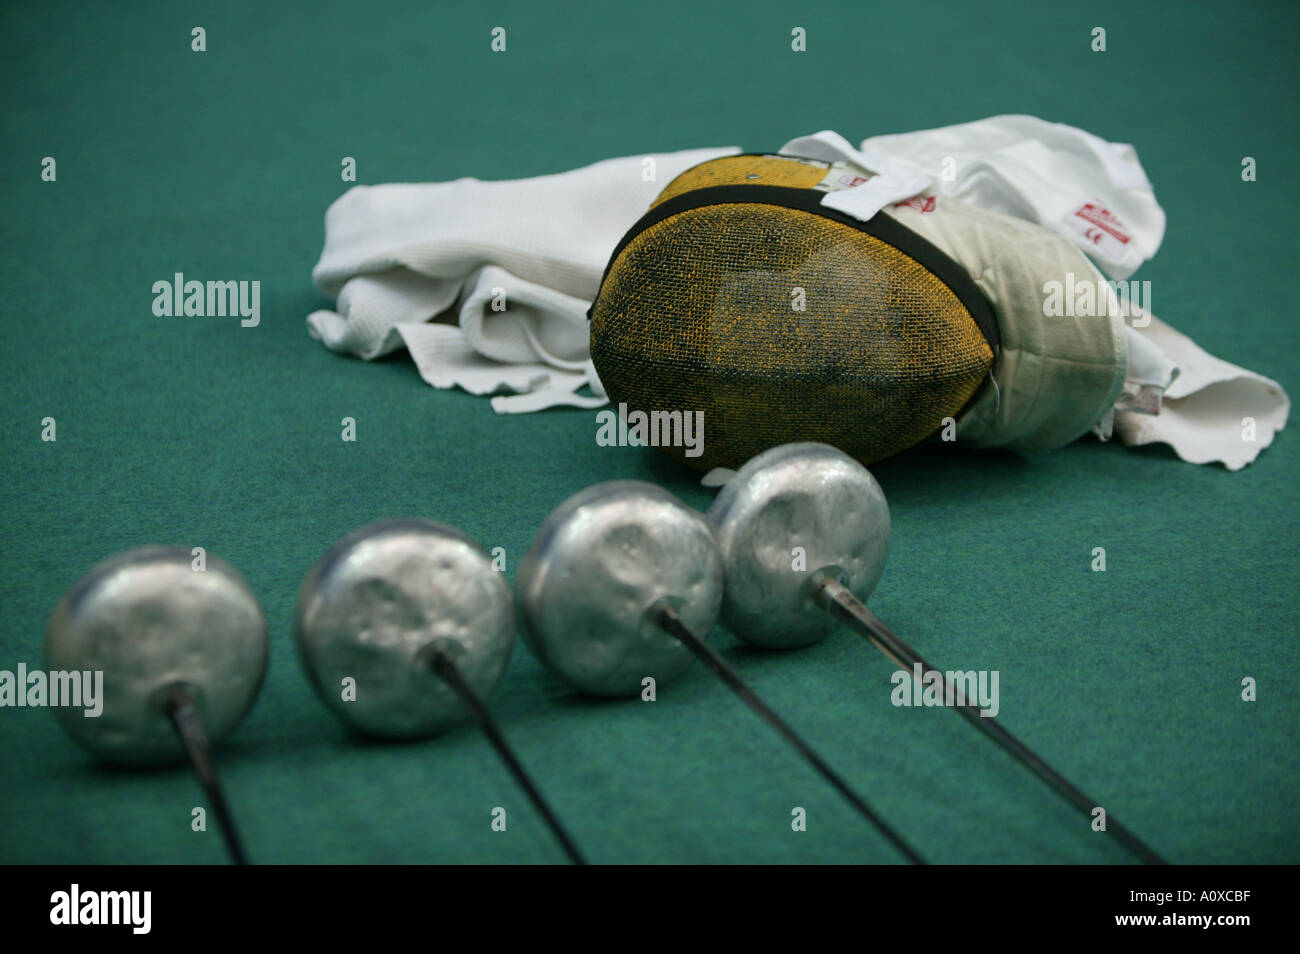 fencing epee gear on the floor Stock Photo